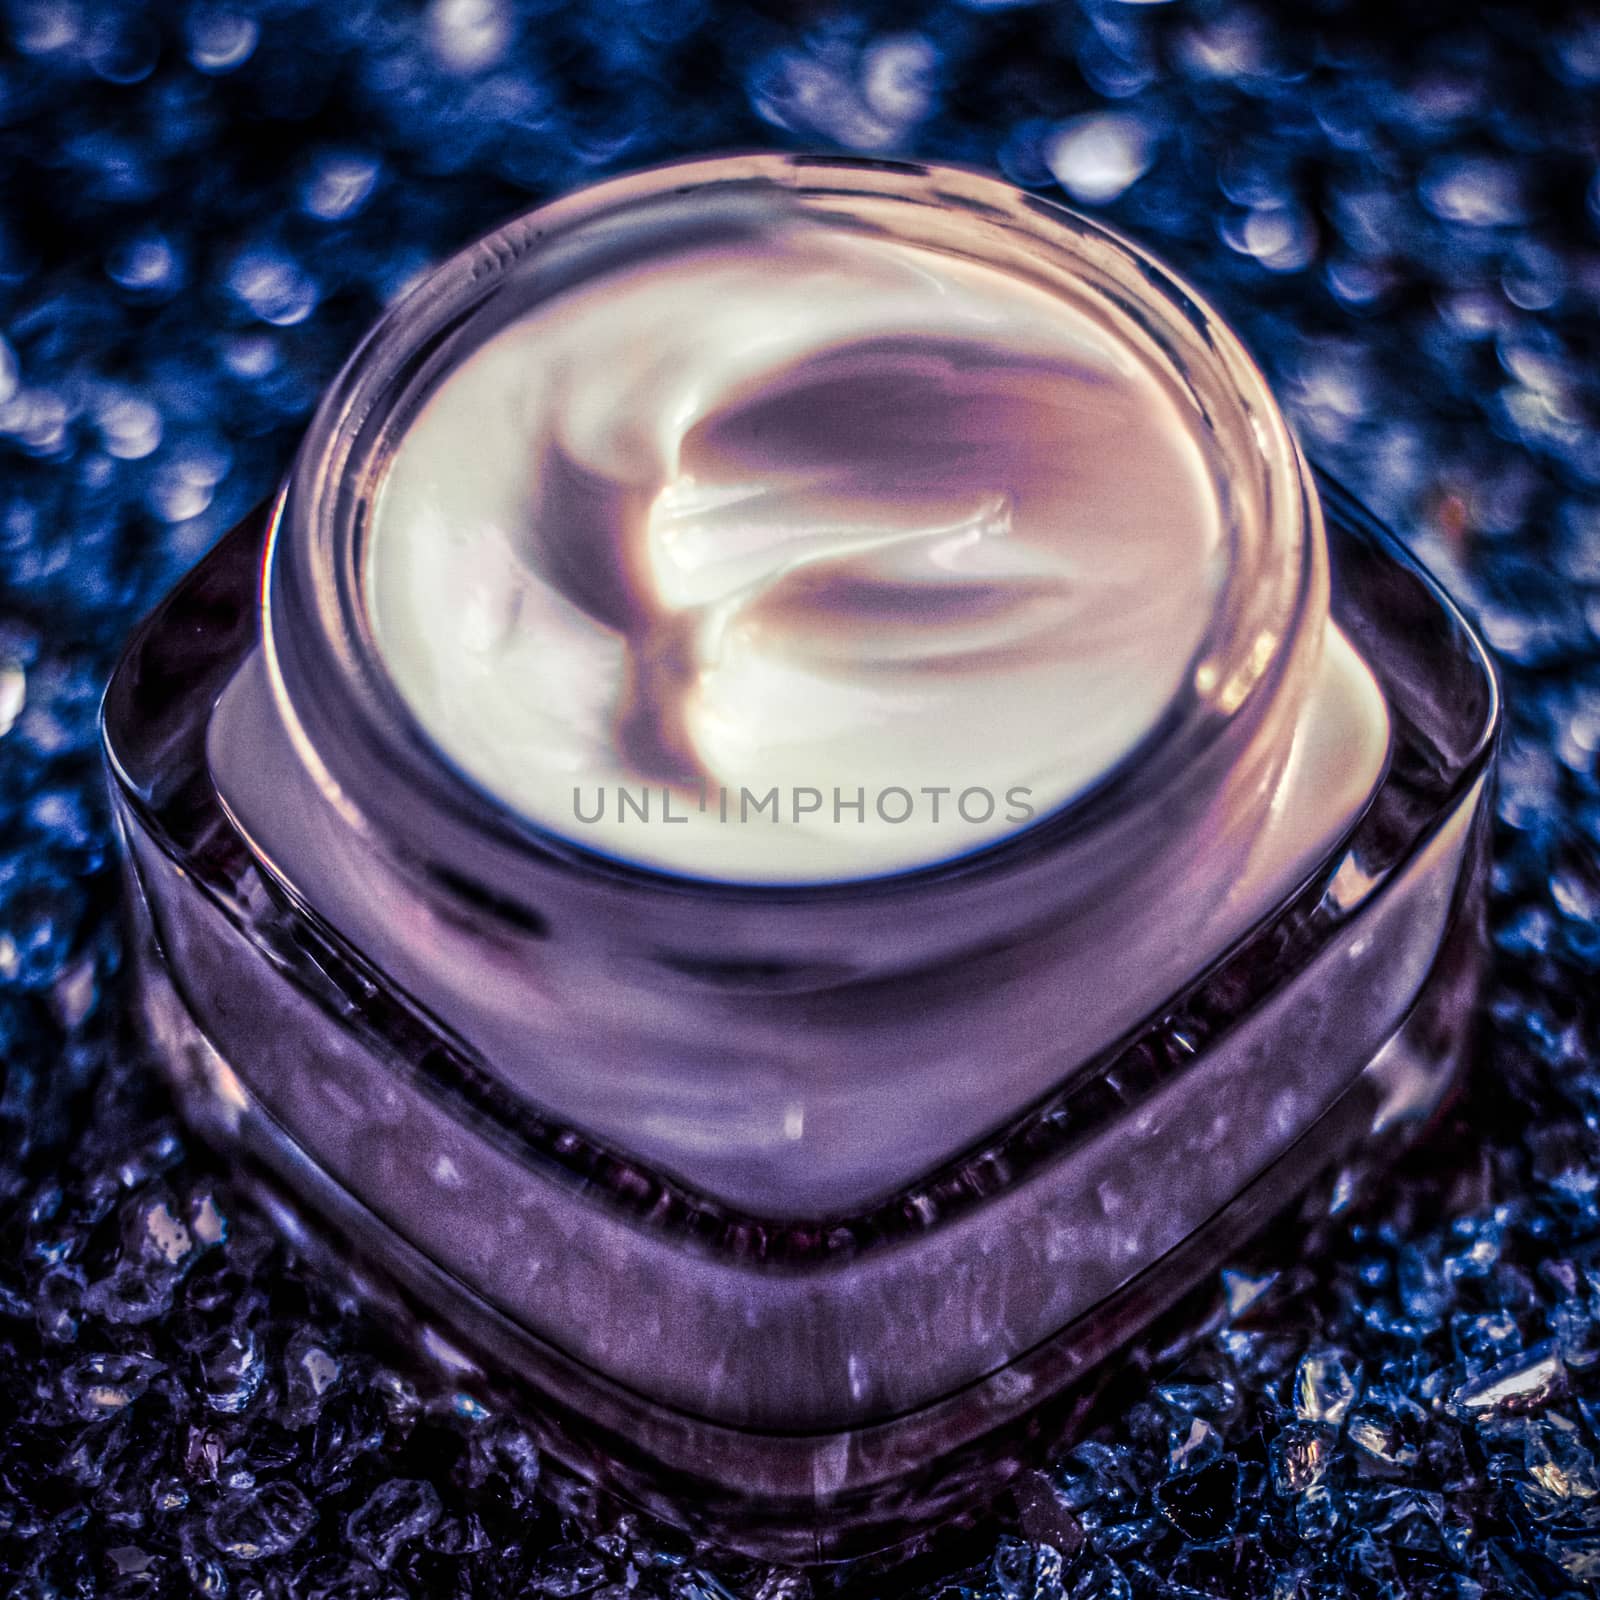 Luxury face cream for healthy skin on shiny glitter background,  by Anneleven